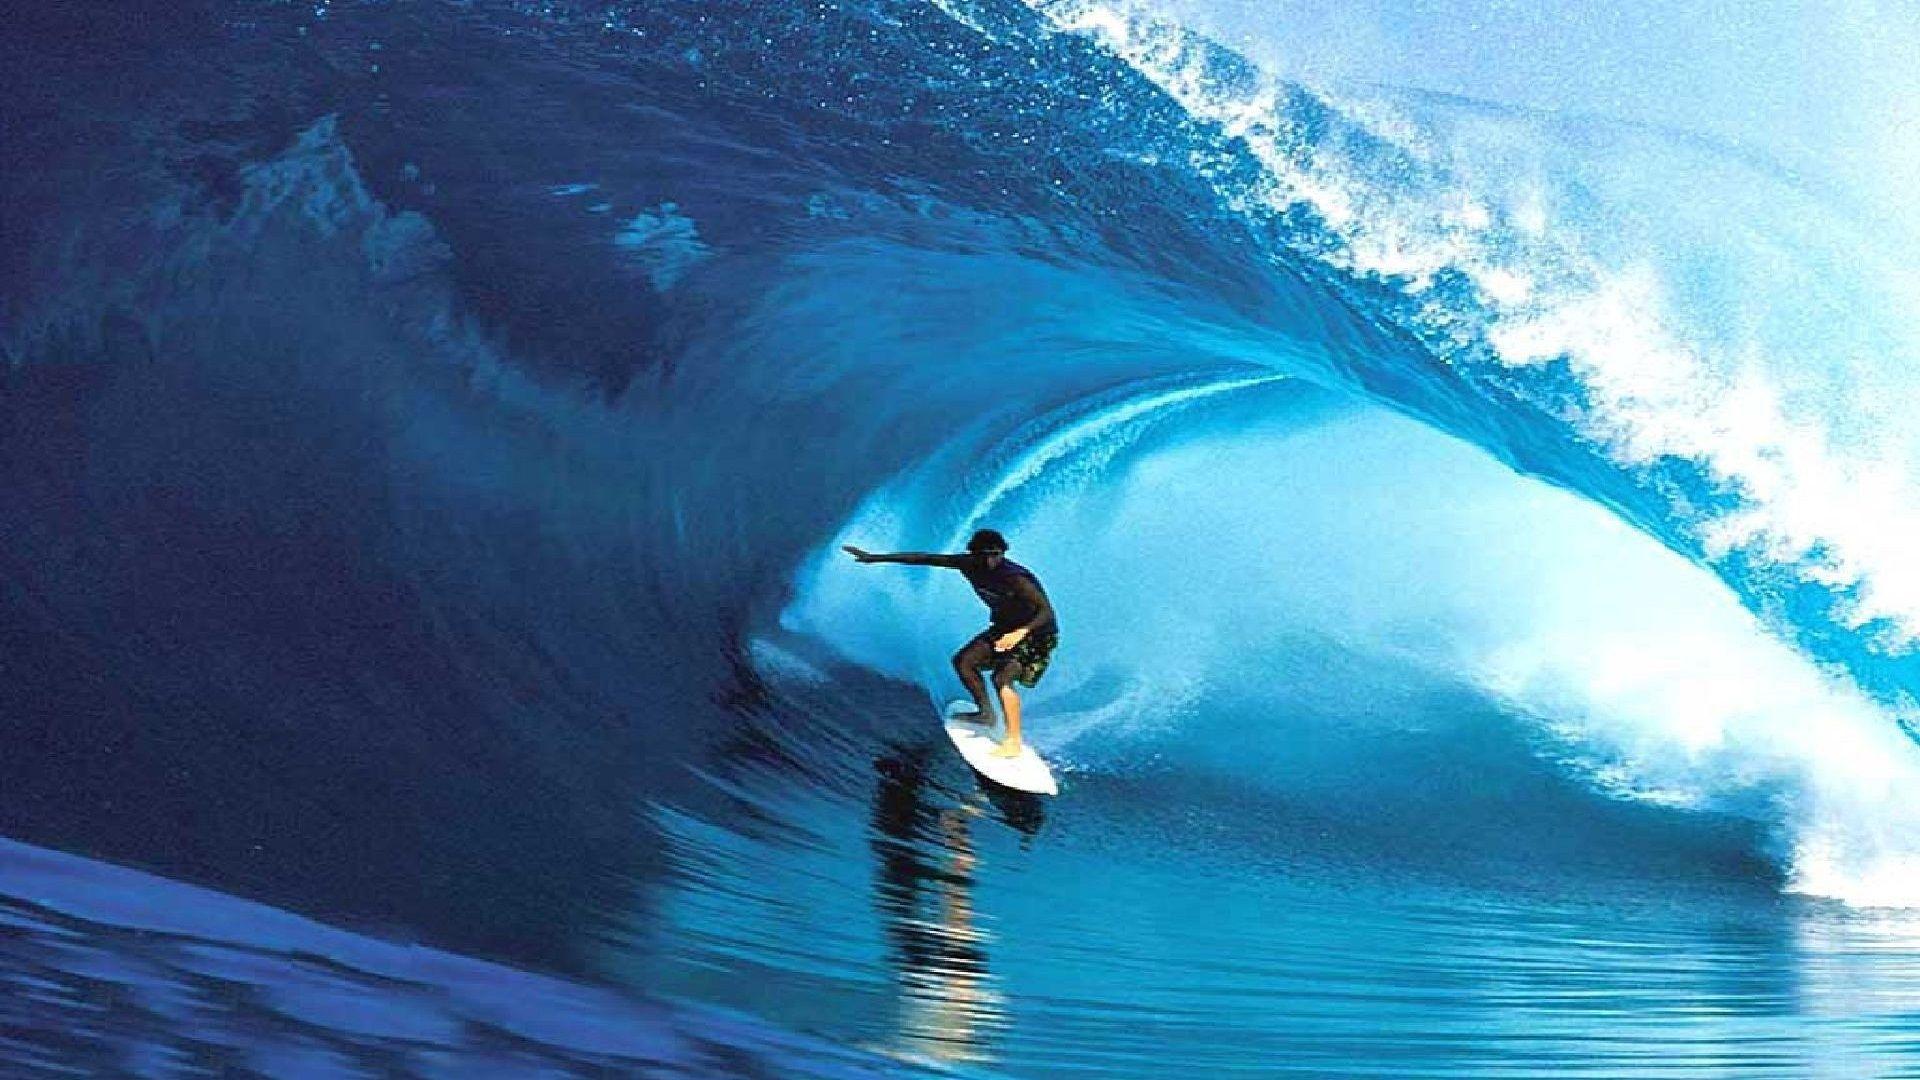 Big Wave Longboard Surfing. Places to Visit. Big waves